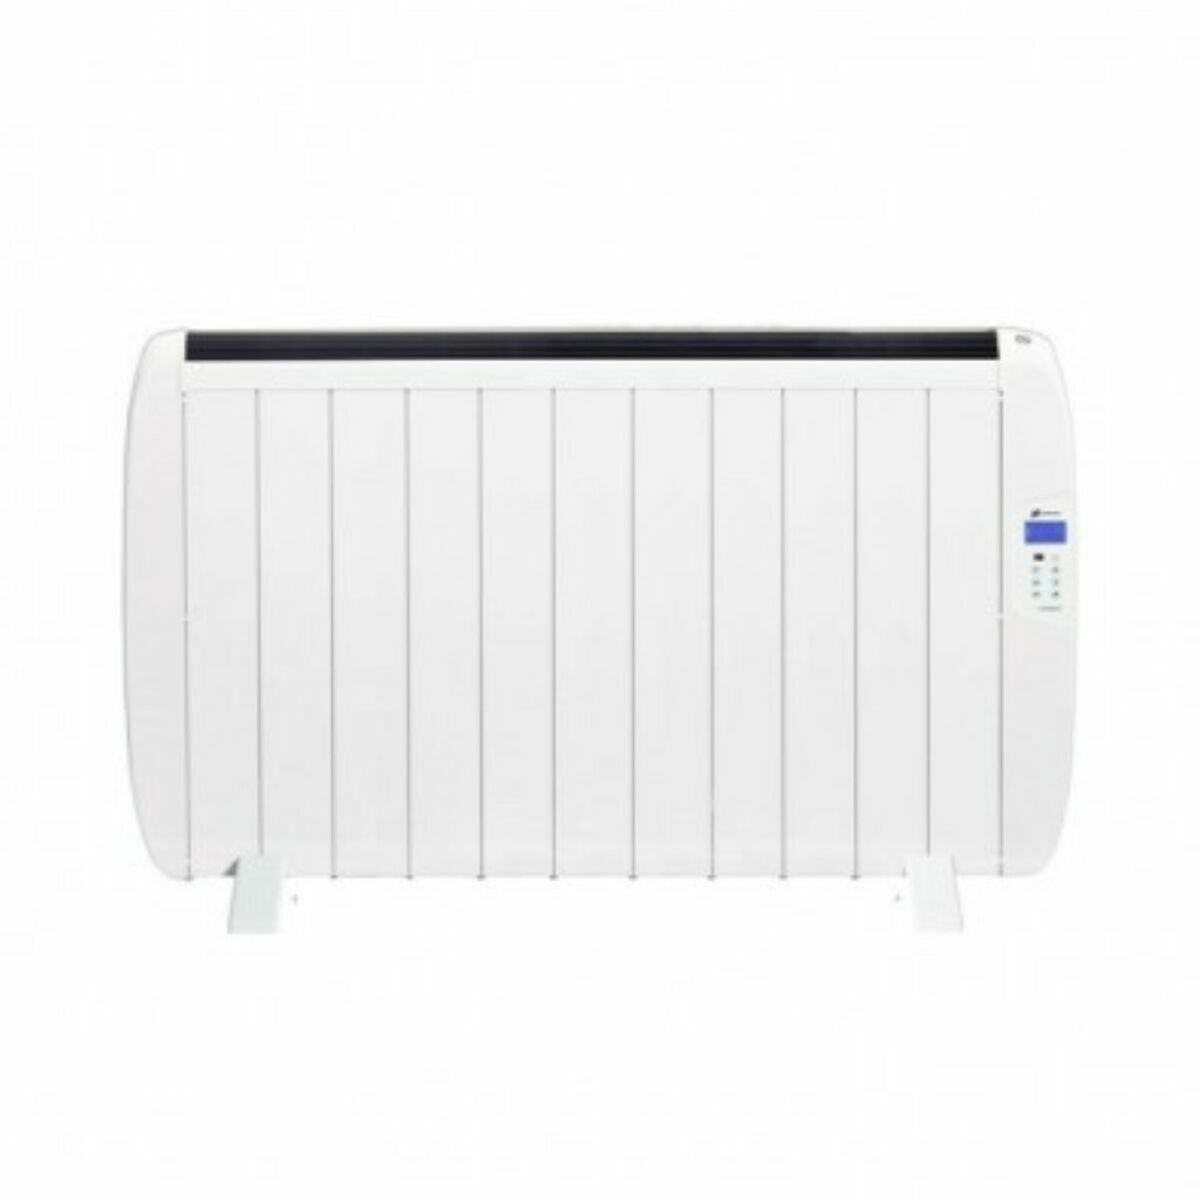 Digital Dry Thermal Electric Radiator (11 chamber) Haverland COMPACT11 1800W